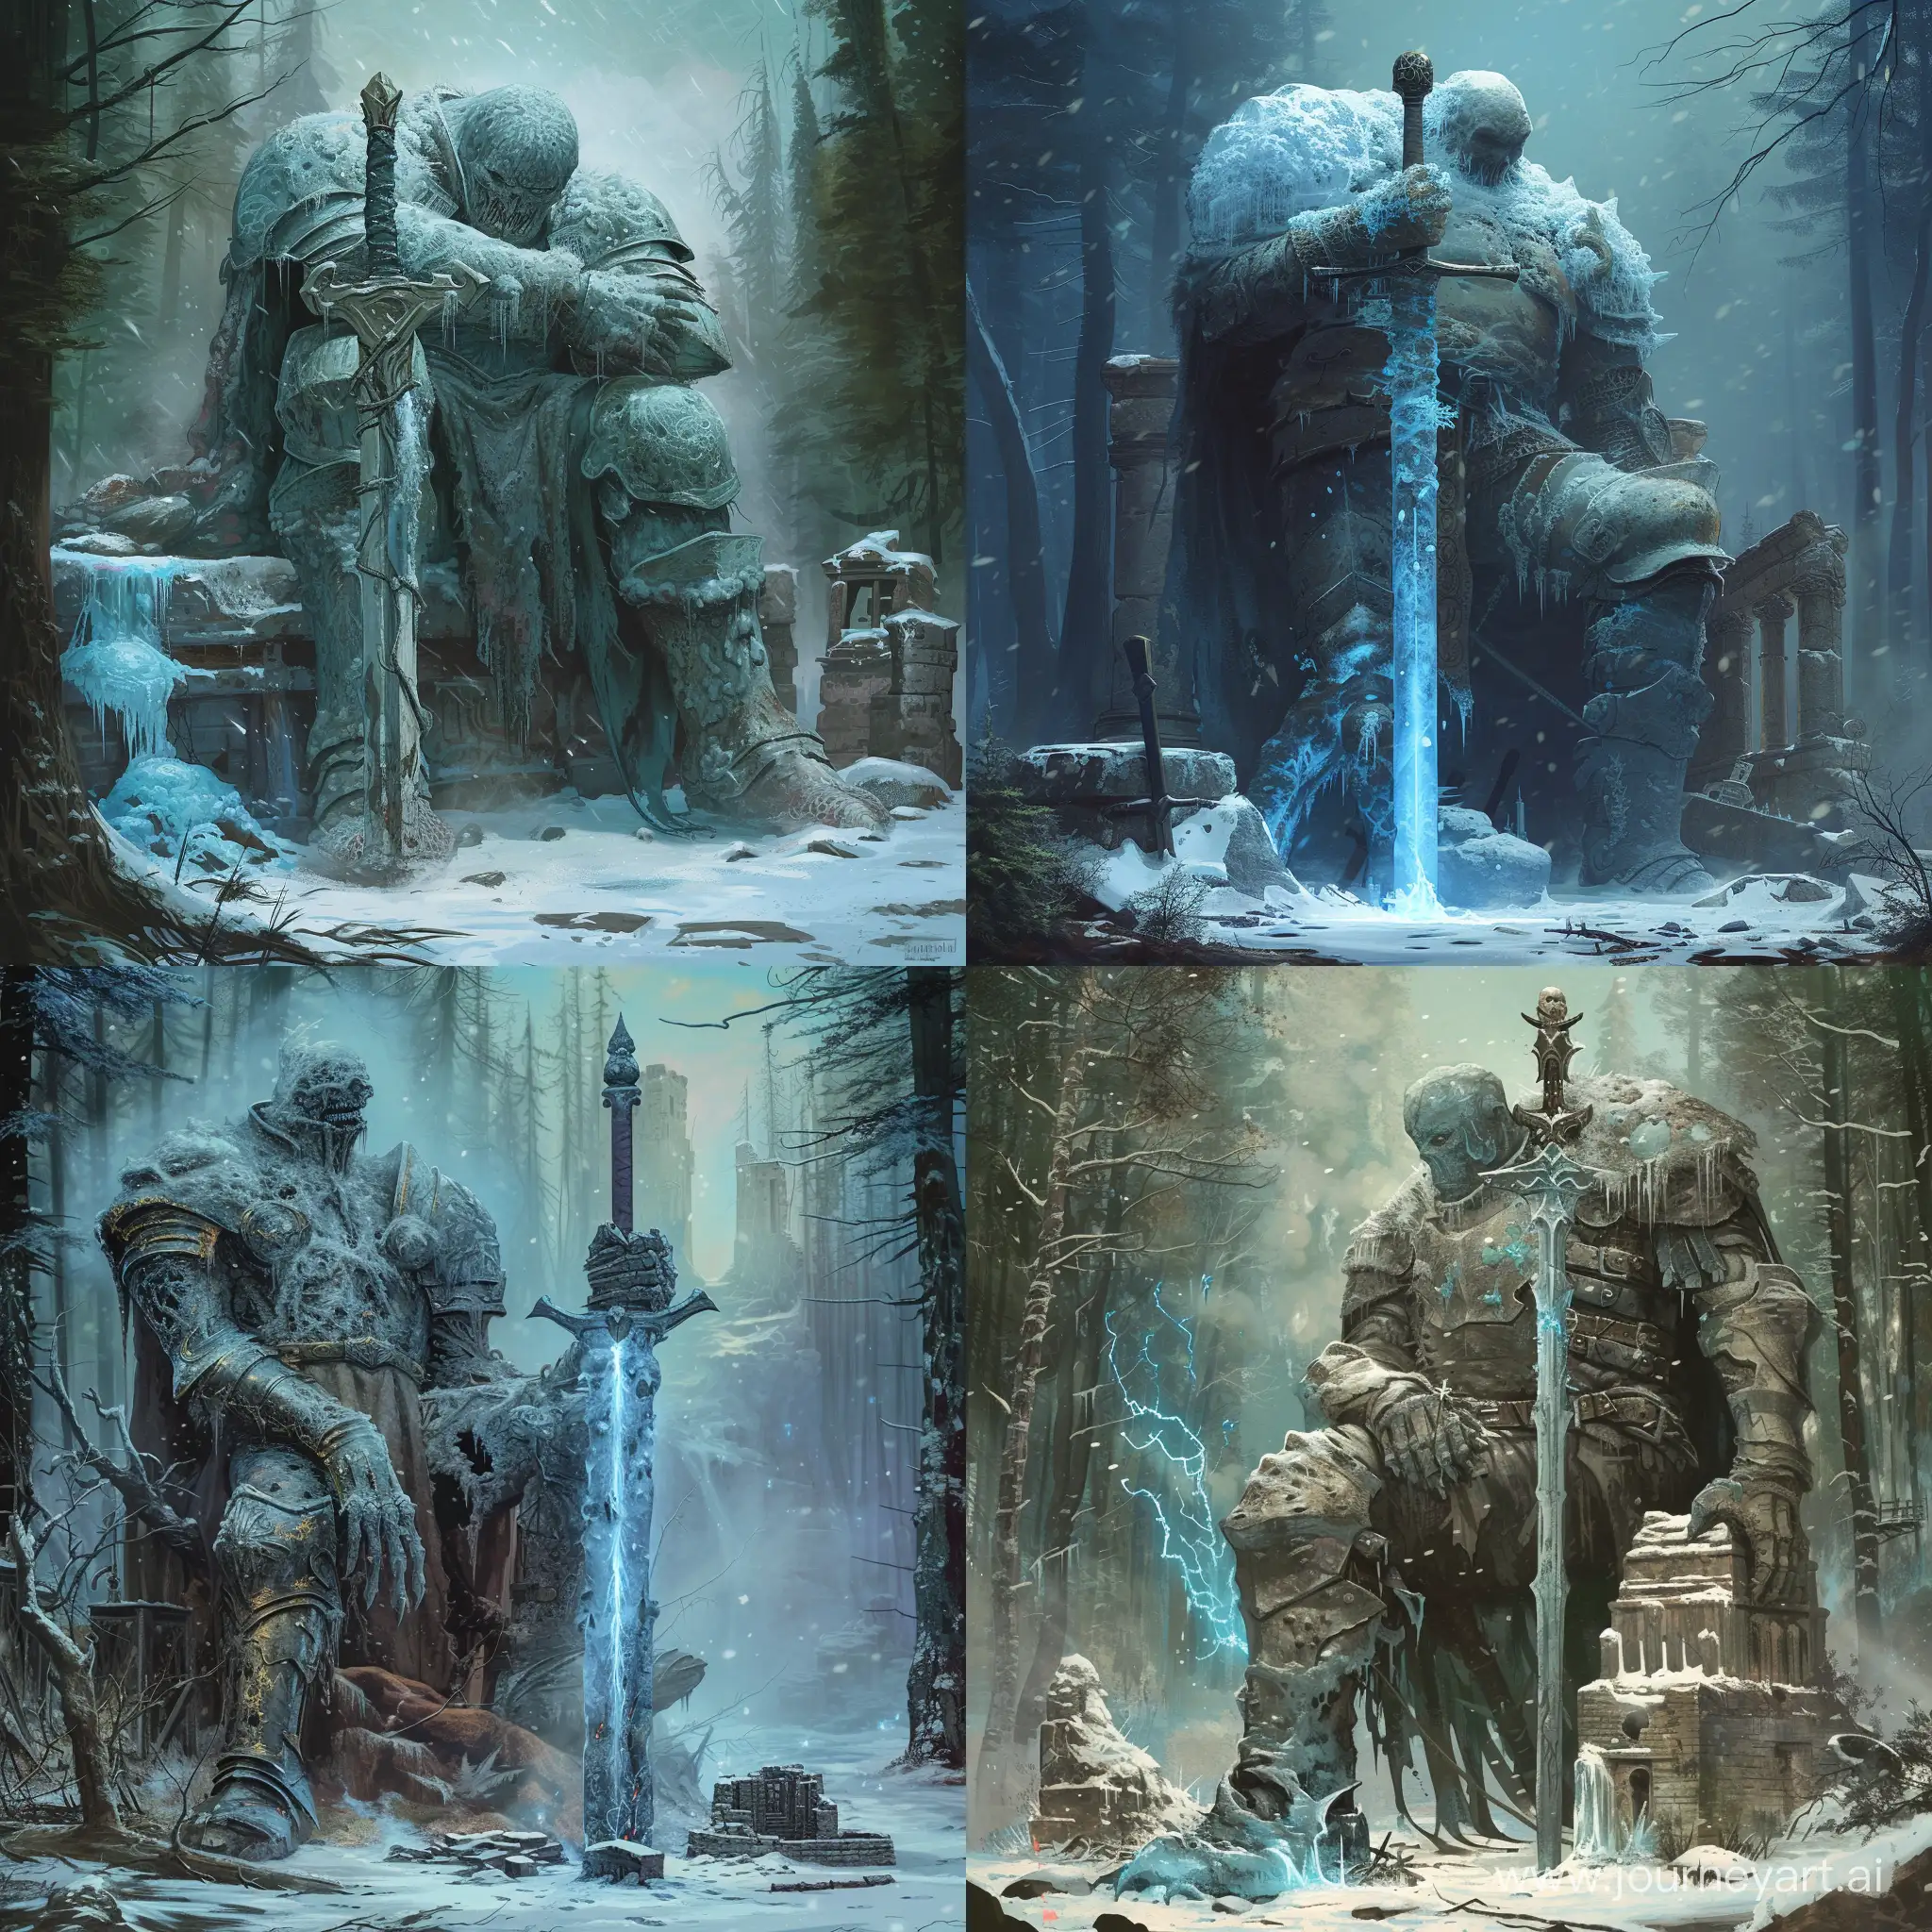 illustration, dark fantasy, a huge deformed knight with ice growths, a terrible knight stands on his feet and rests with his hand holding a sword in his other hand, against the background of a forest, snow and ice formed near the knight, ruins next to the knight, a magical sword emitting cold